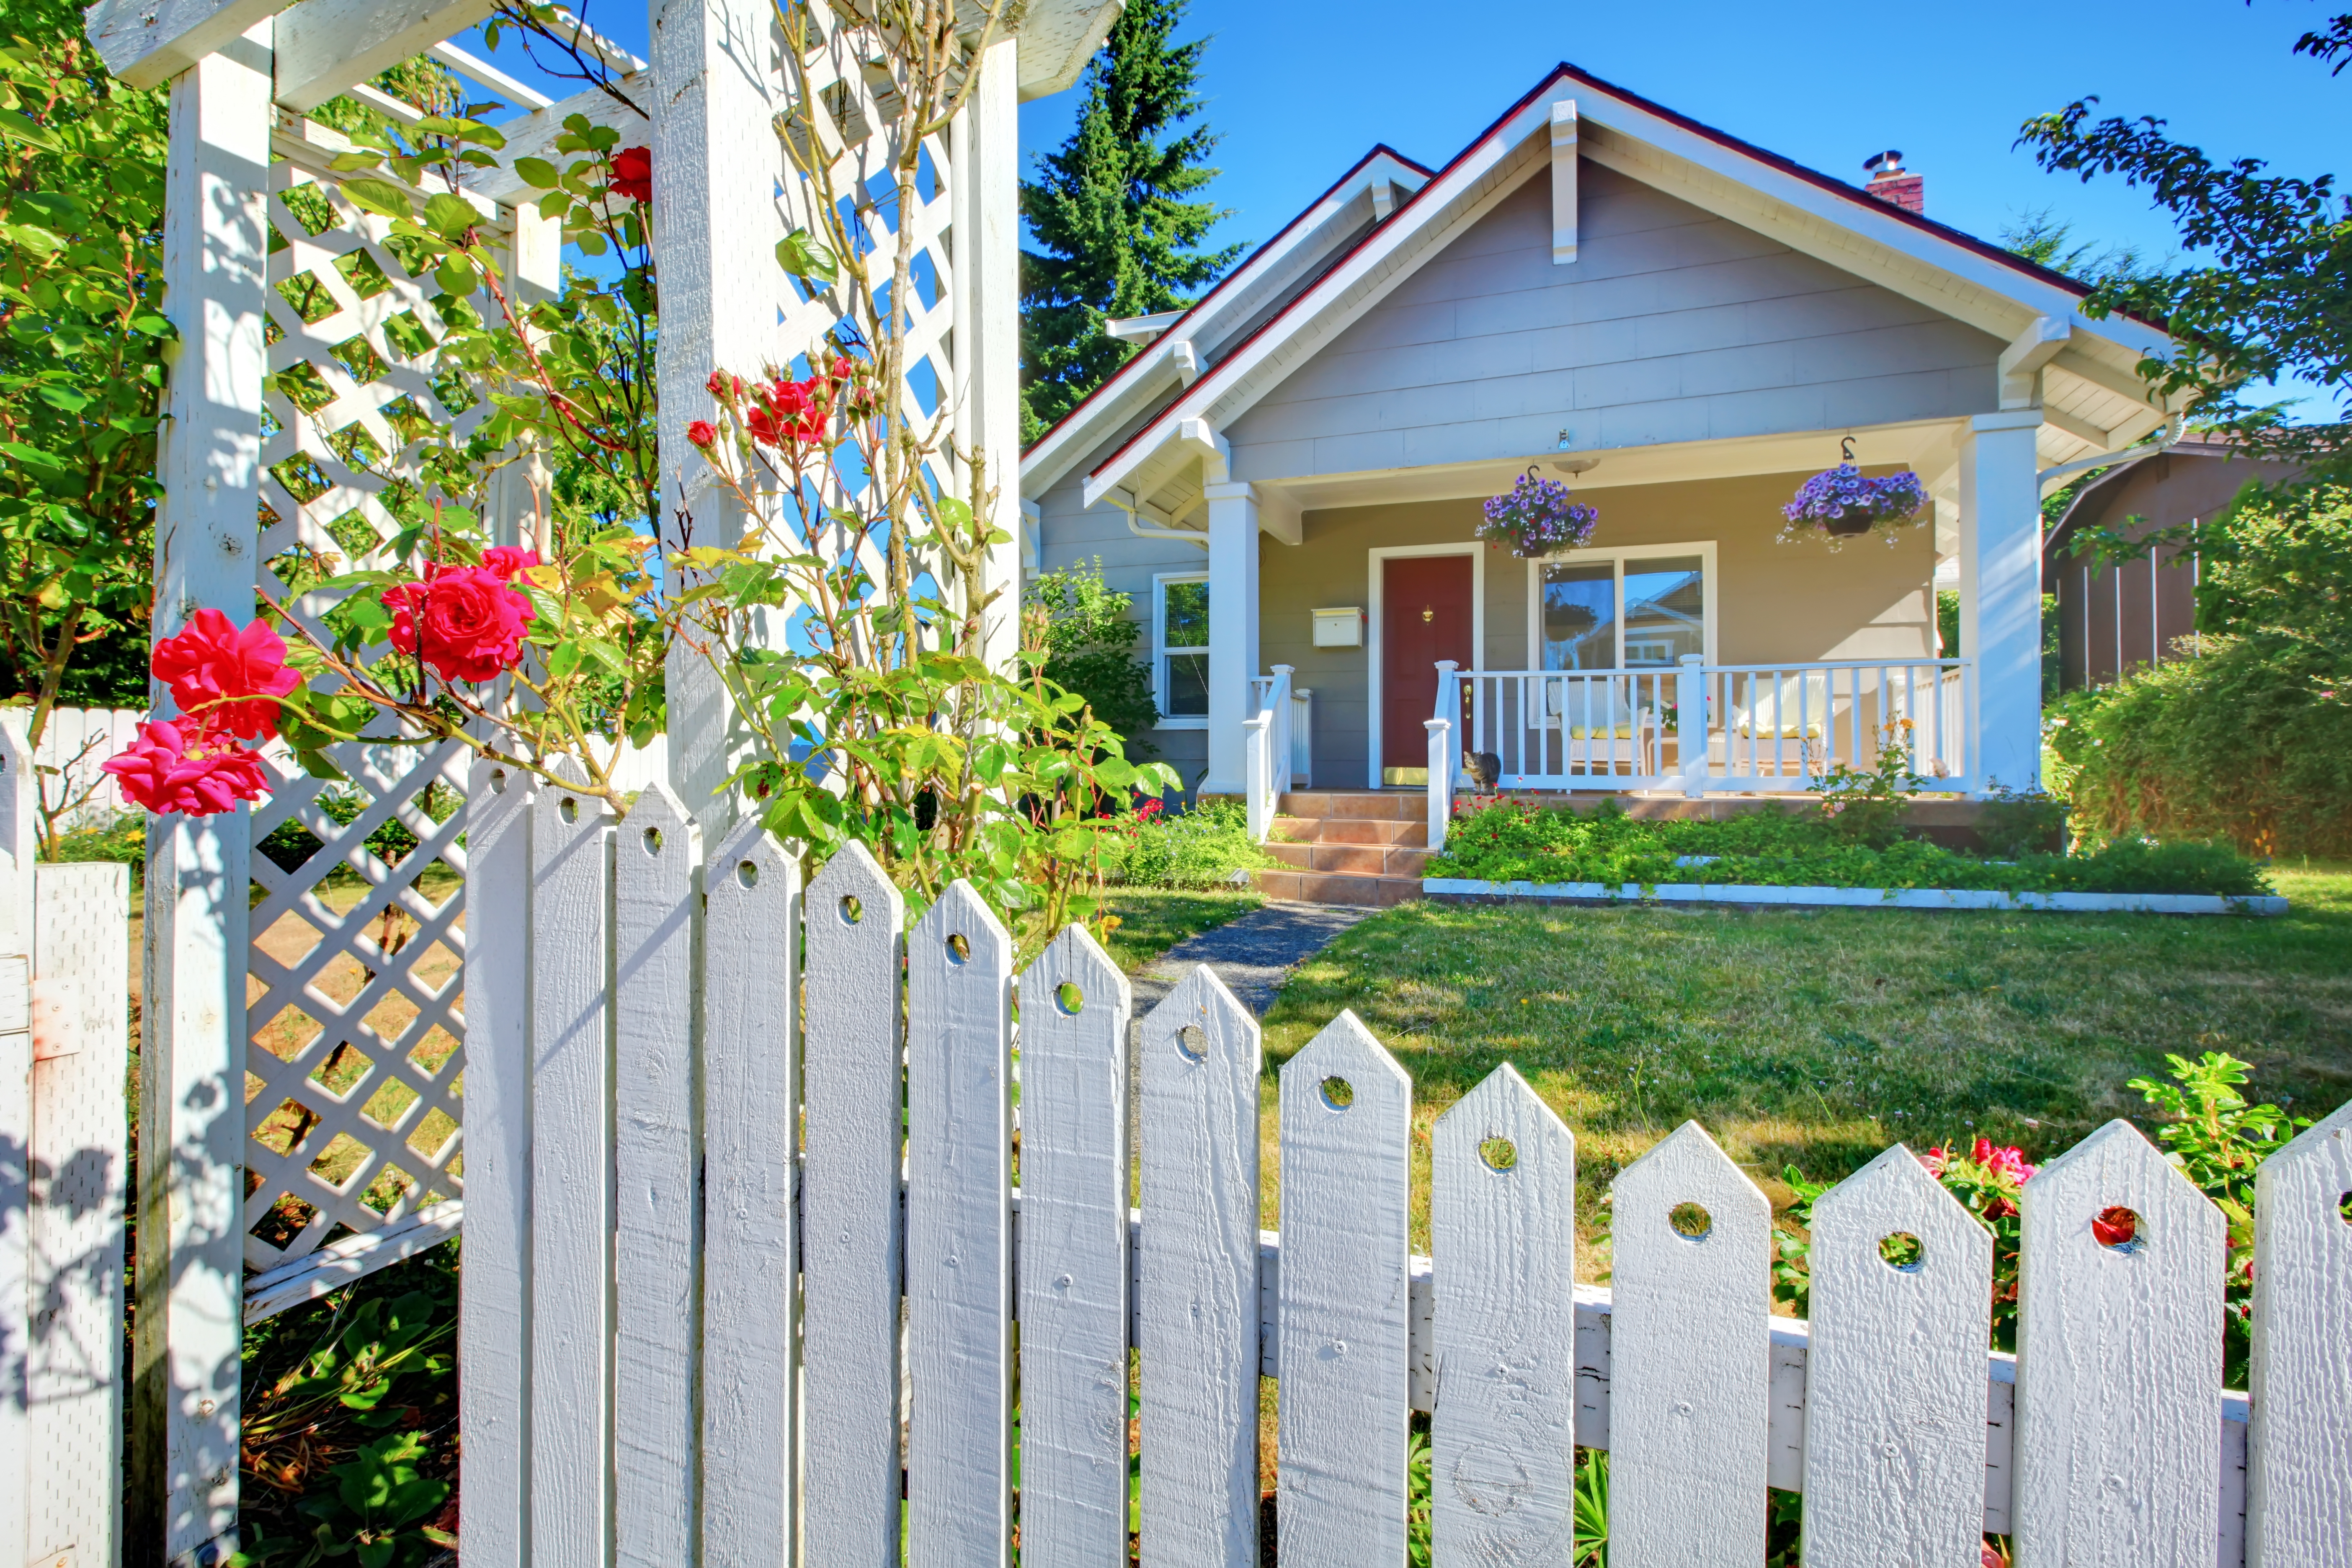 House tucked behind a beautiful white picket fence and green grass and flowers.